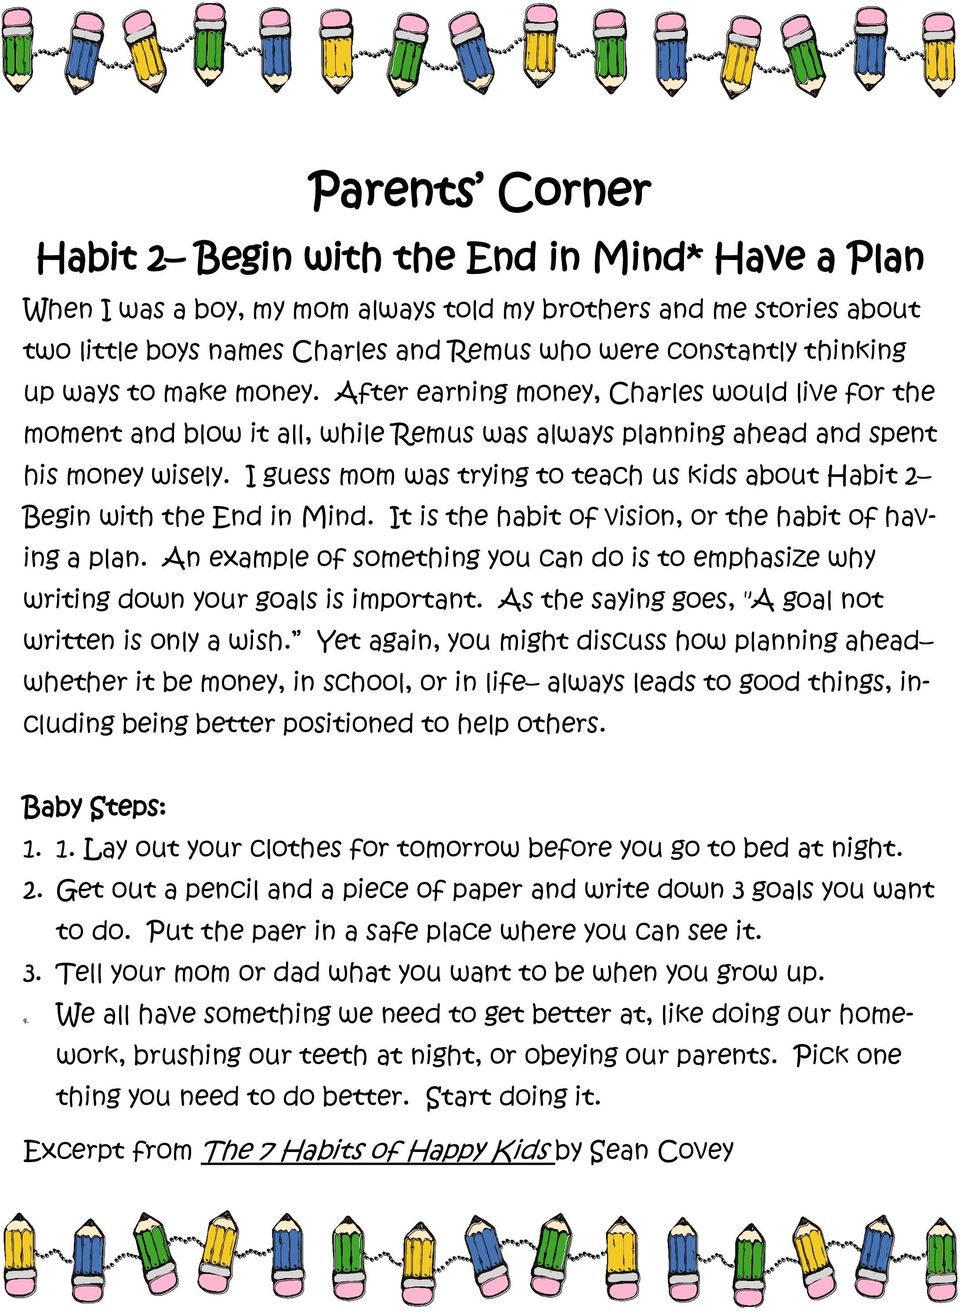 I guess mom was trying to teach us kids about Habit 2 Begin with the End in Mind. It is the habit of vision, or the habit of having a plan.